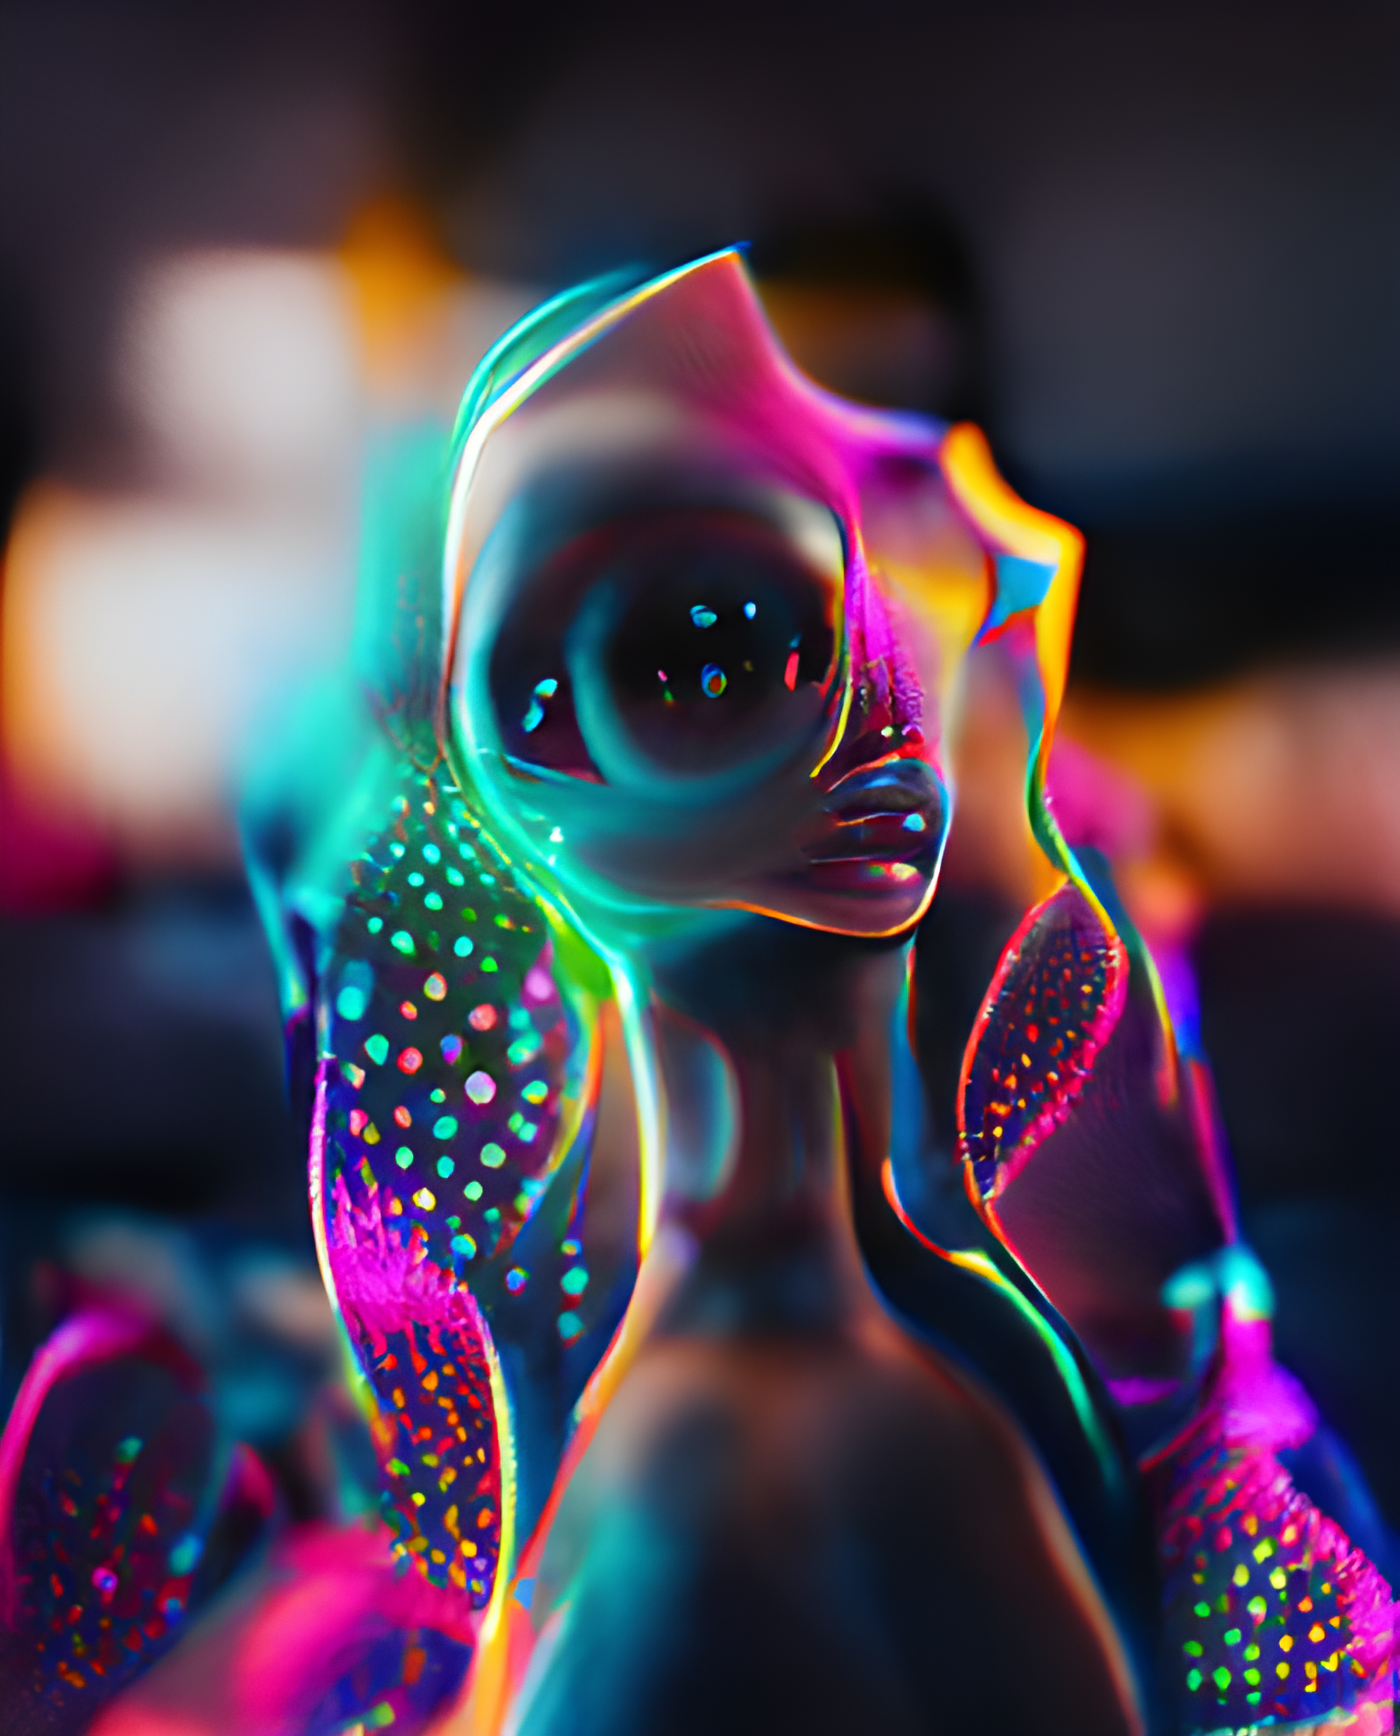 The alien in the psychedelic cloak